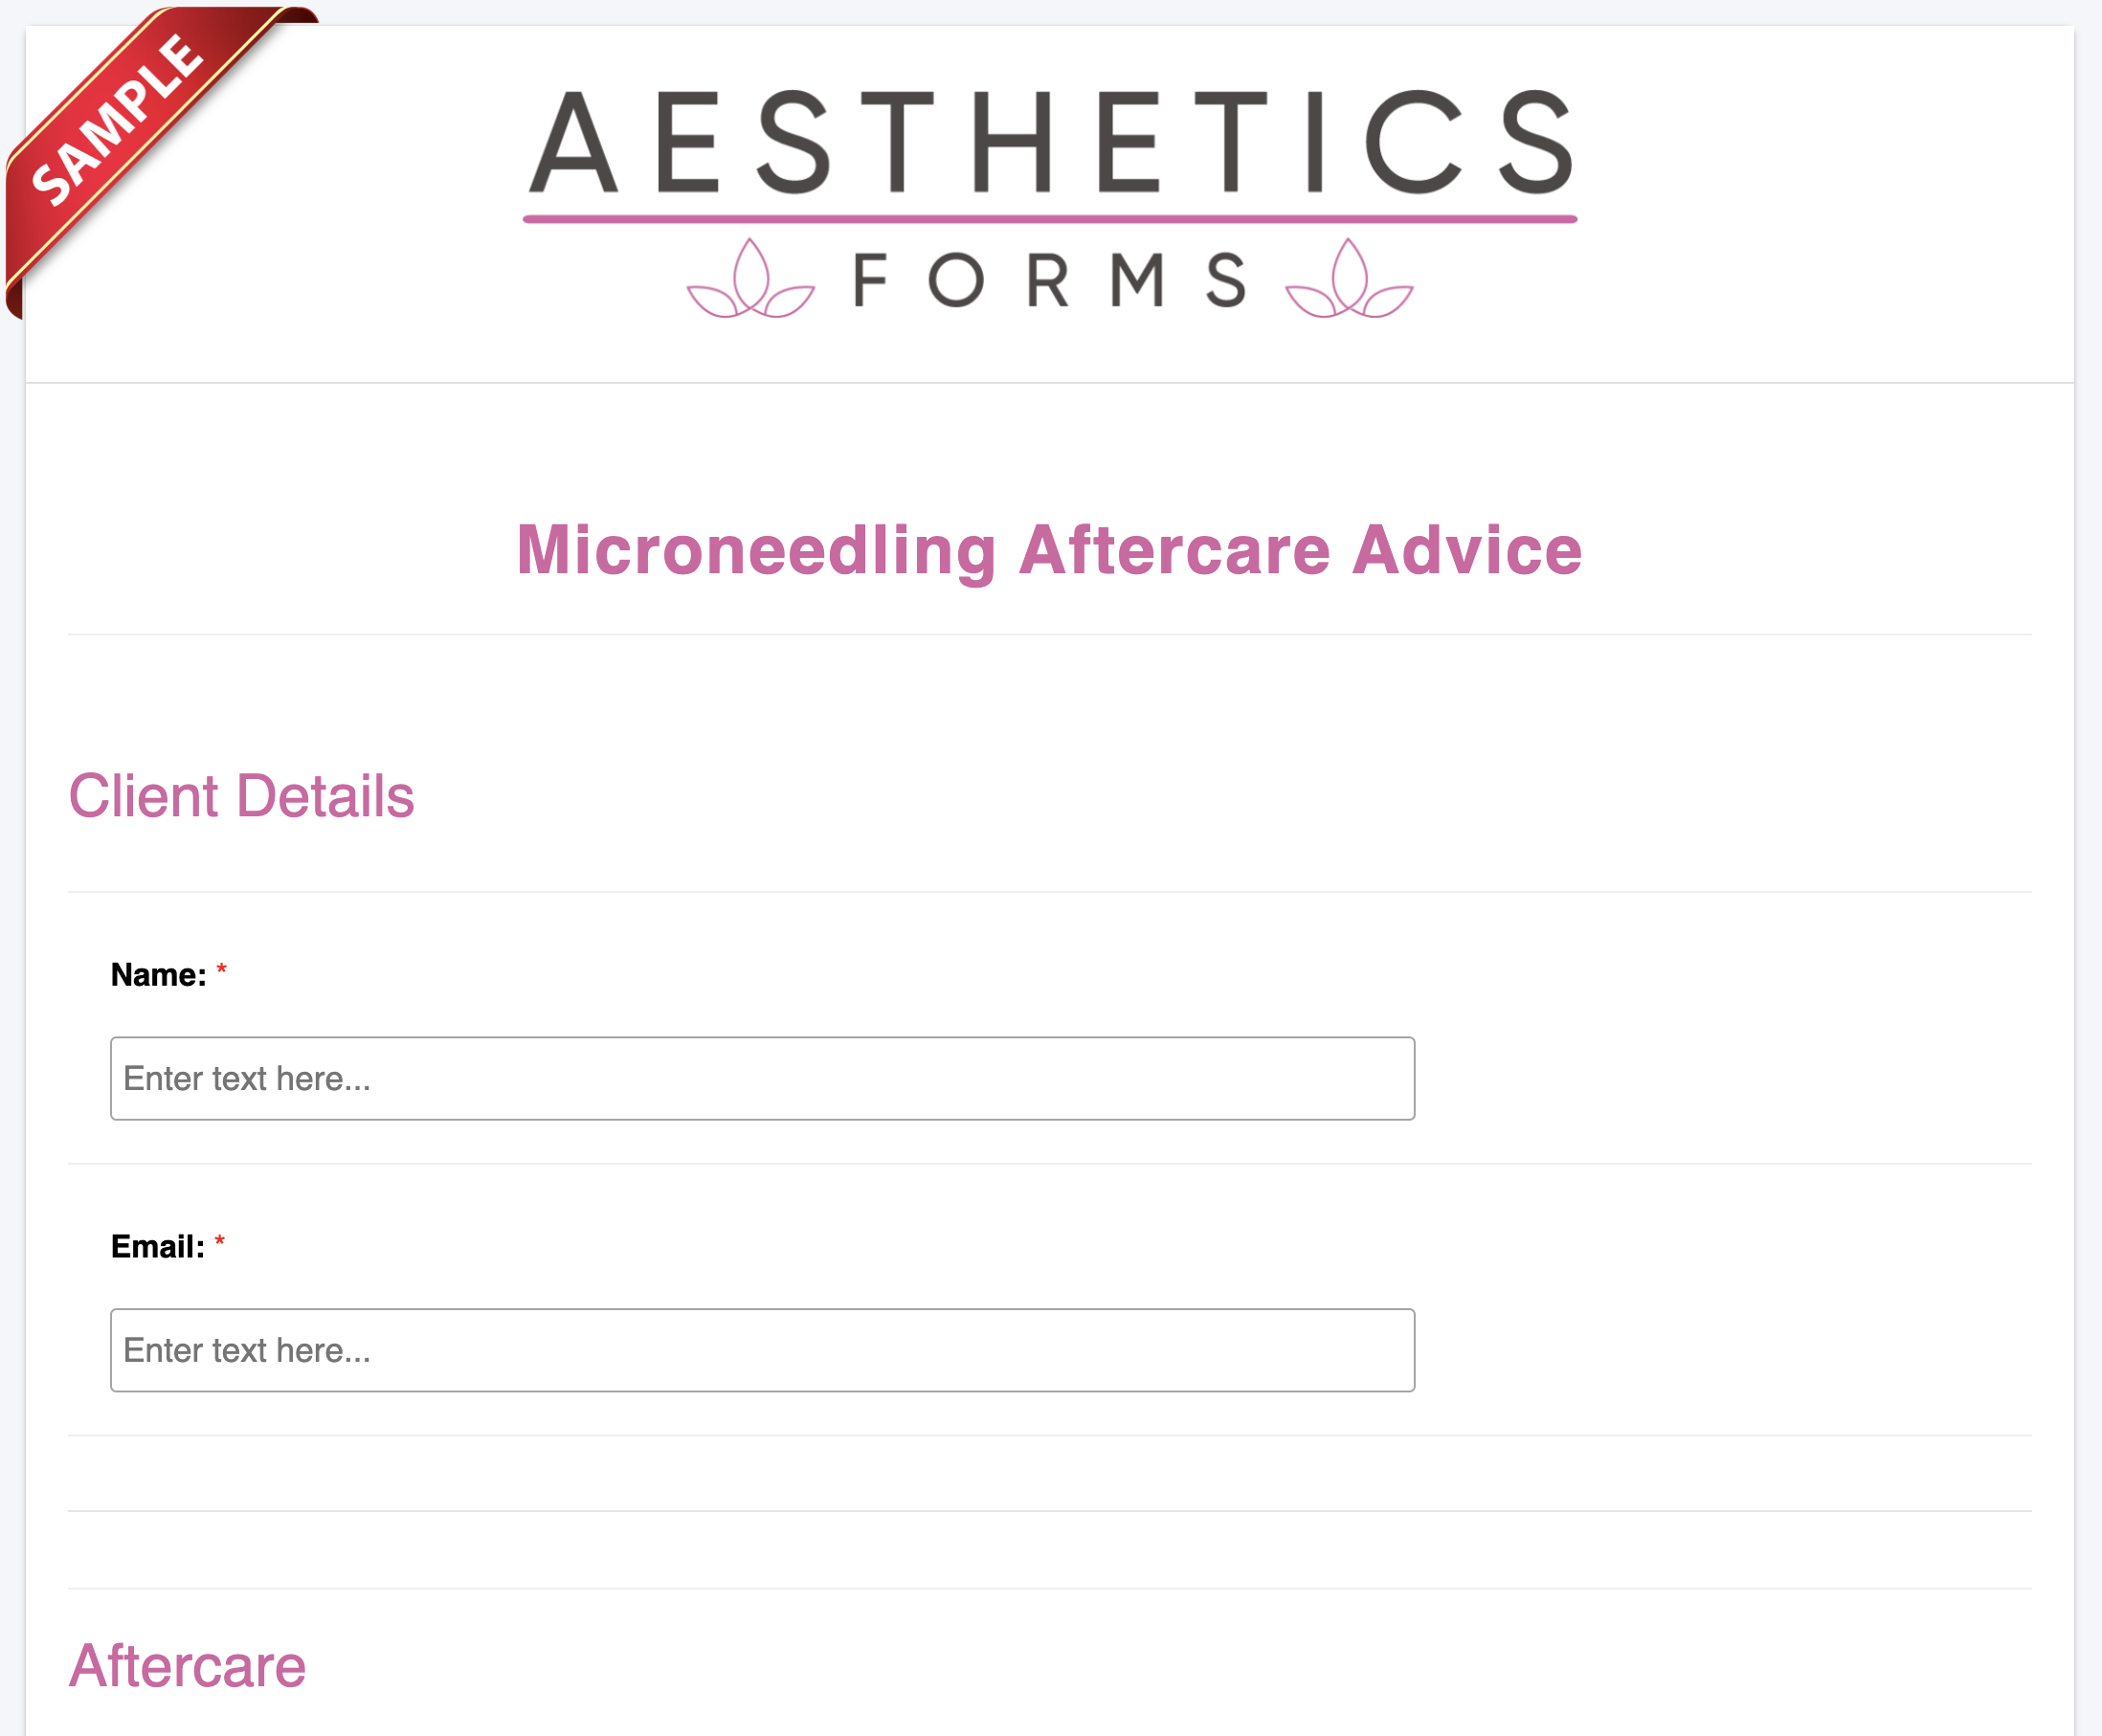 Microneedling Aftercare Form